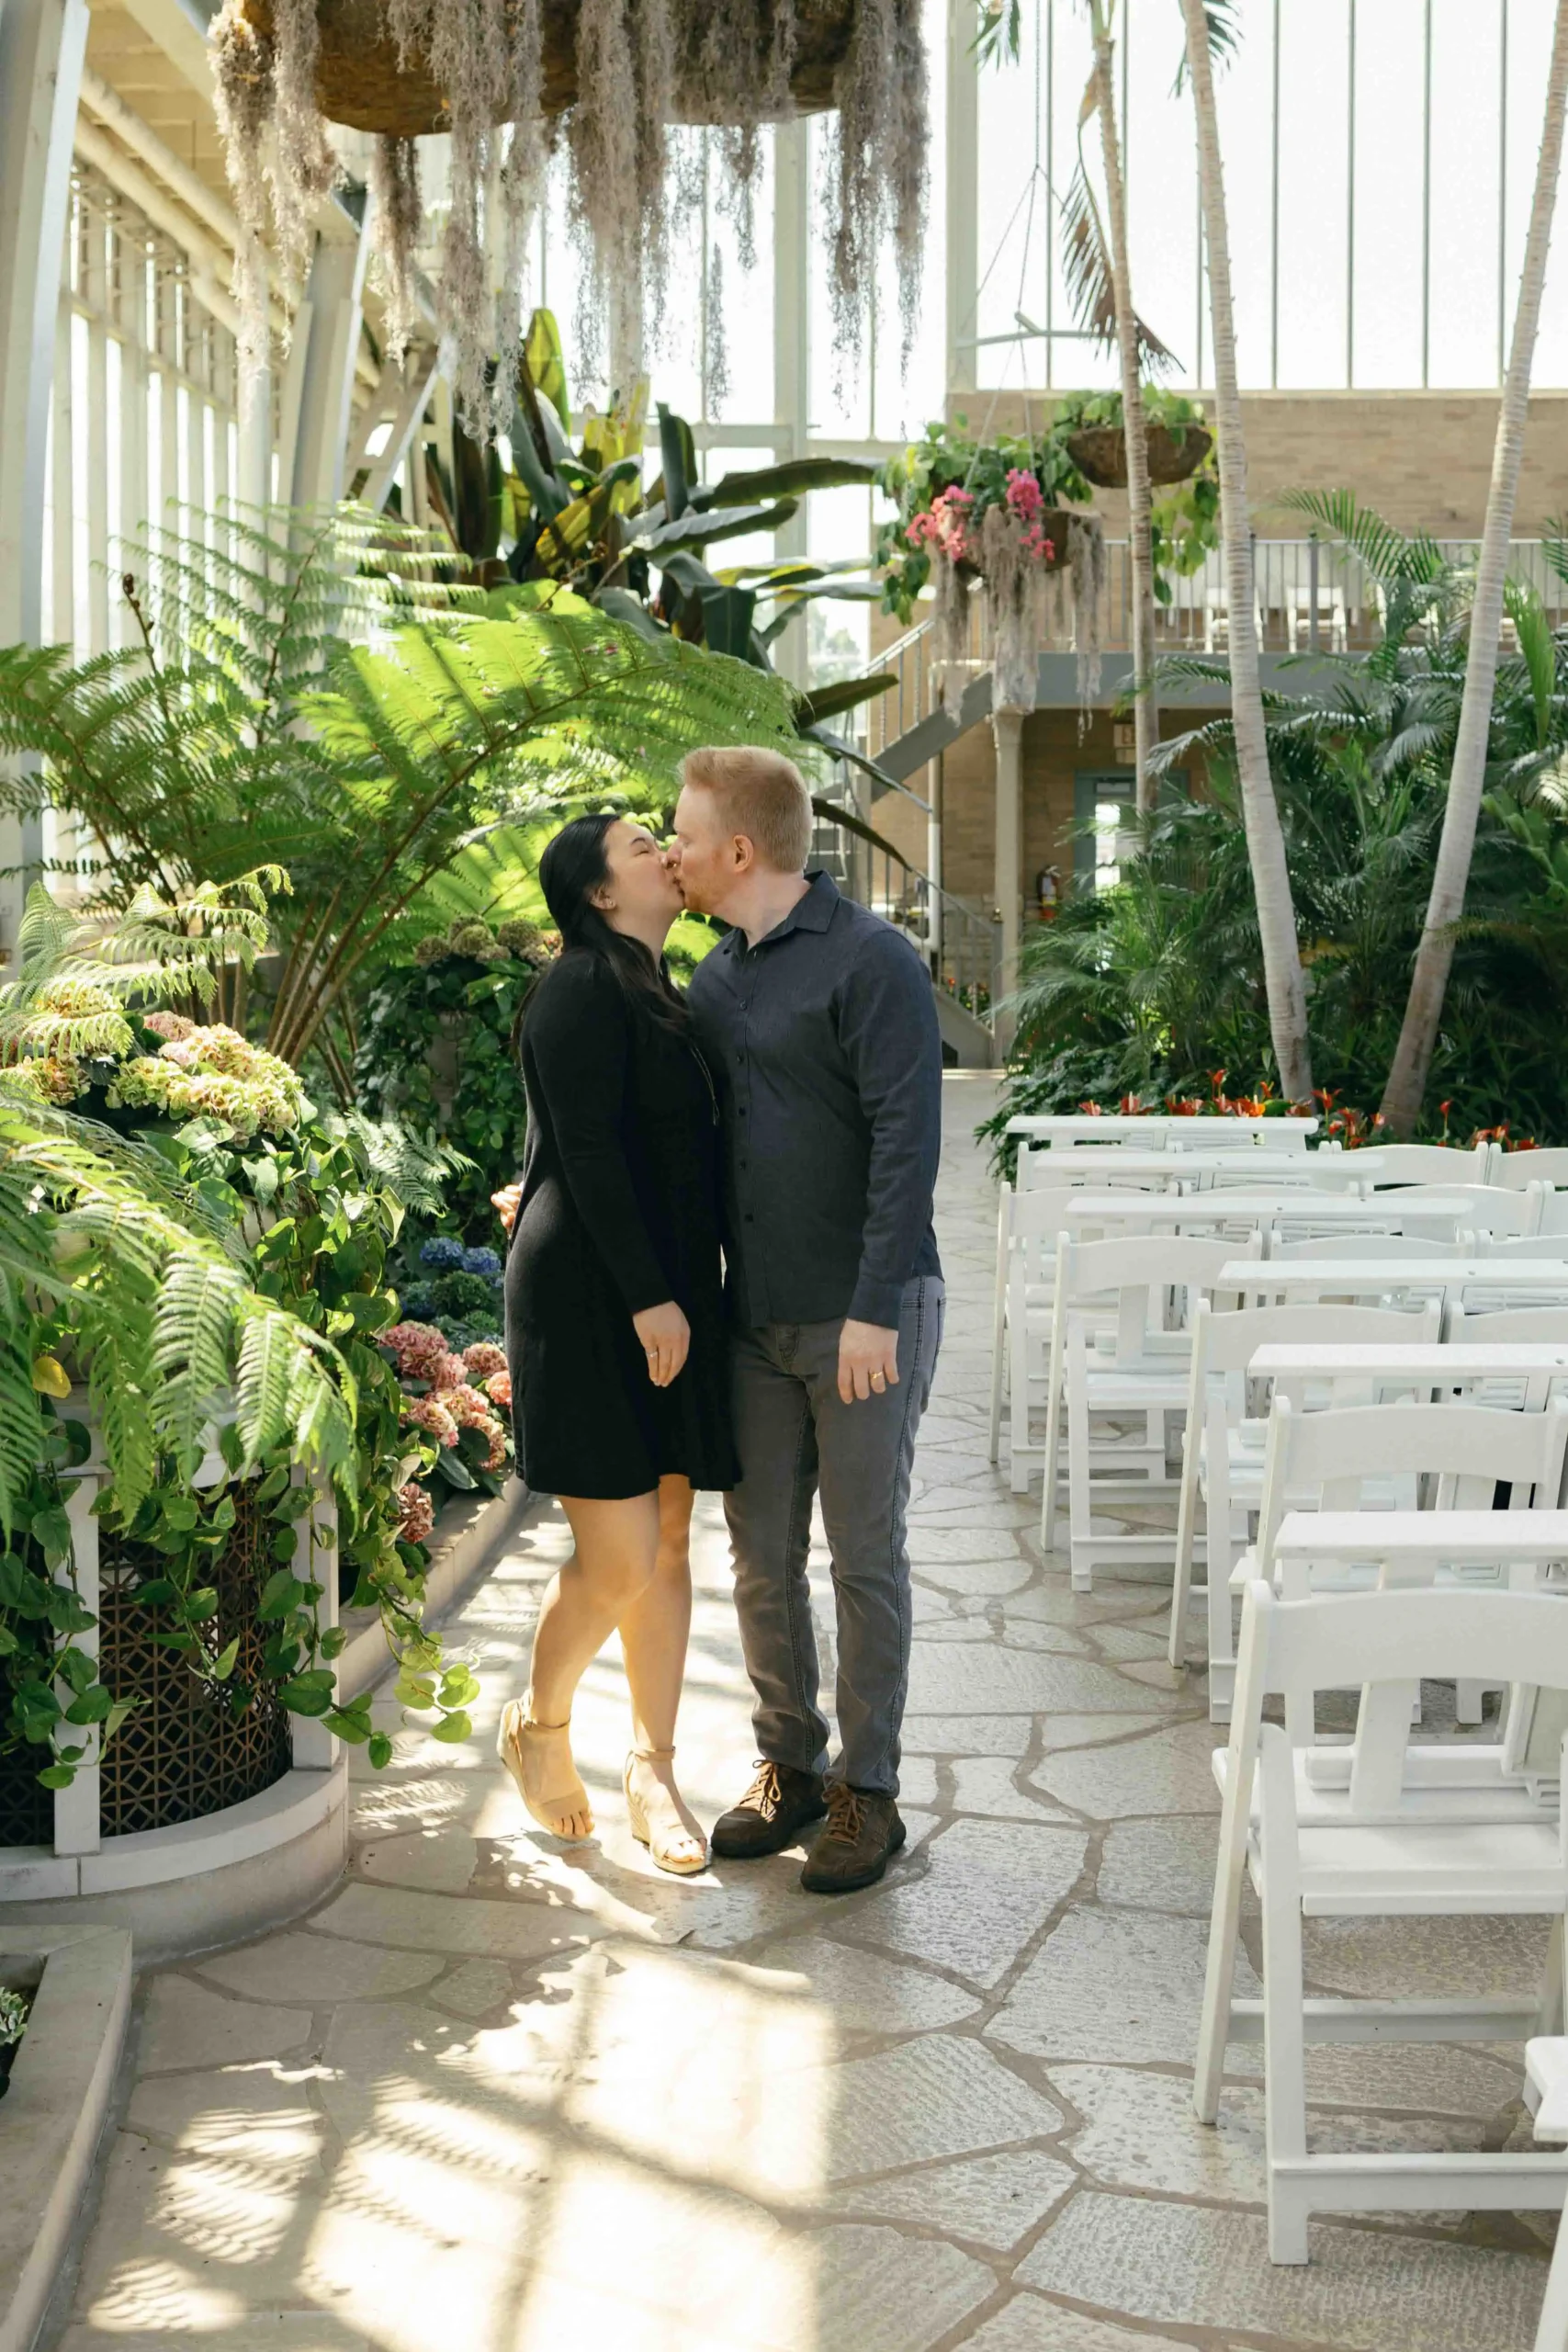 A couple kissing in a sunny greenhouse venue in St. Louis, Missouri.